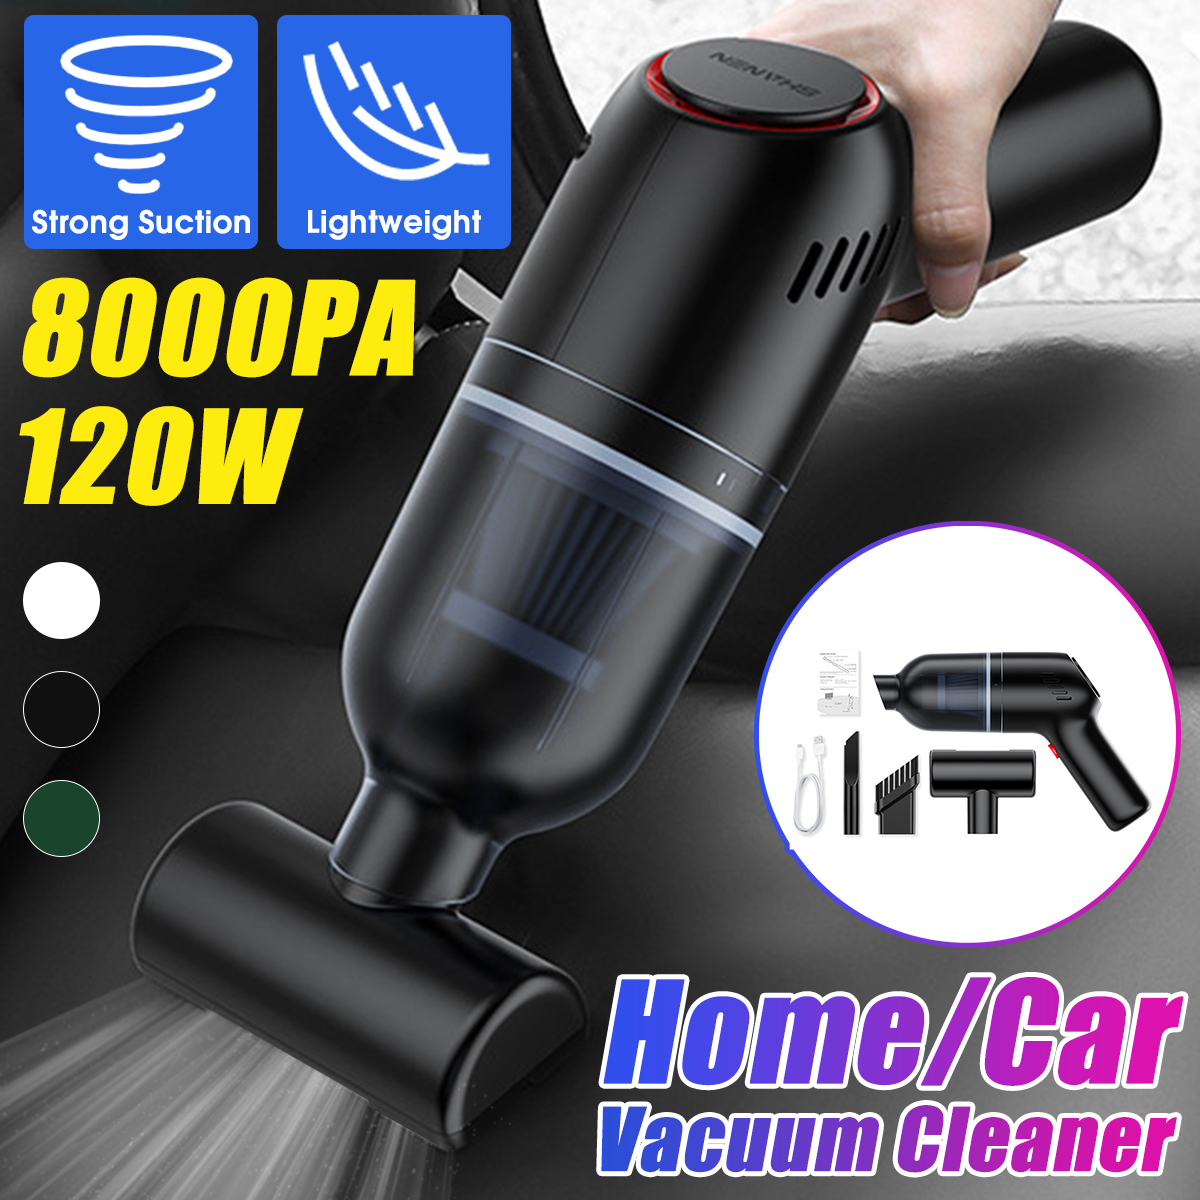 Wireless-Rechargeable-8000Pa-Suction-Car-Vacuum-Cleaner-Portable-Home-Duster-1806425-1